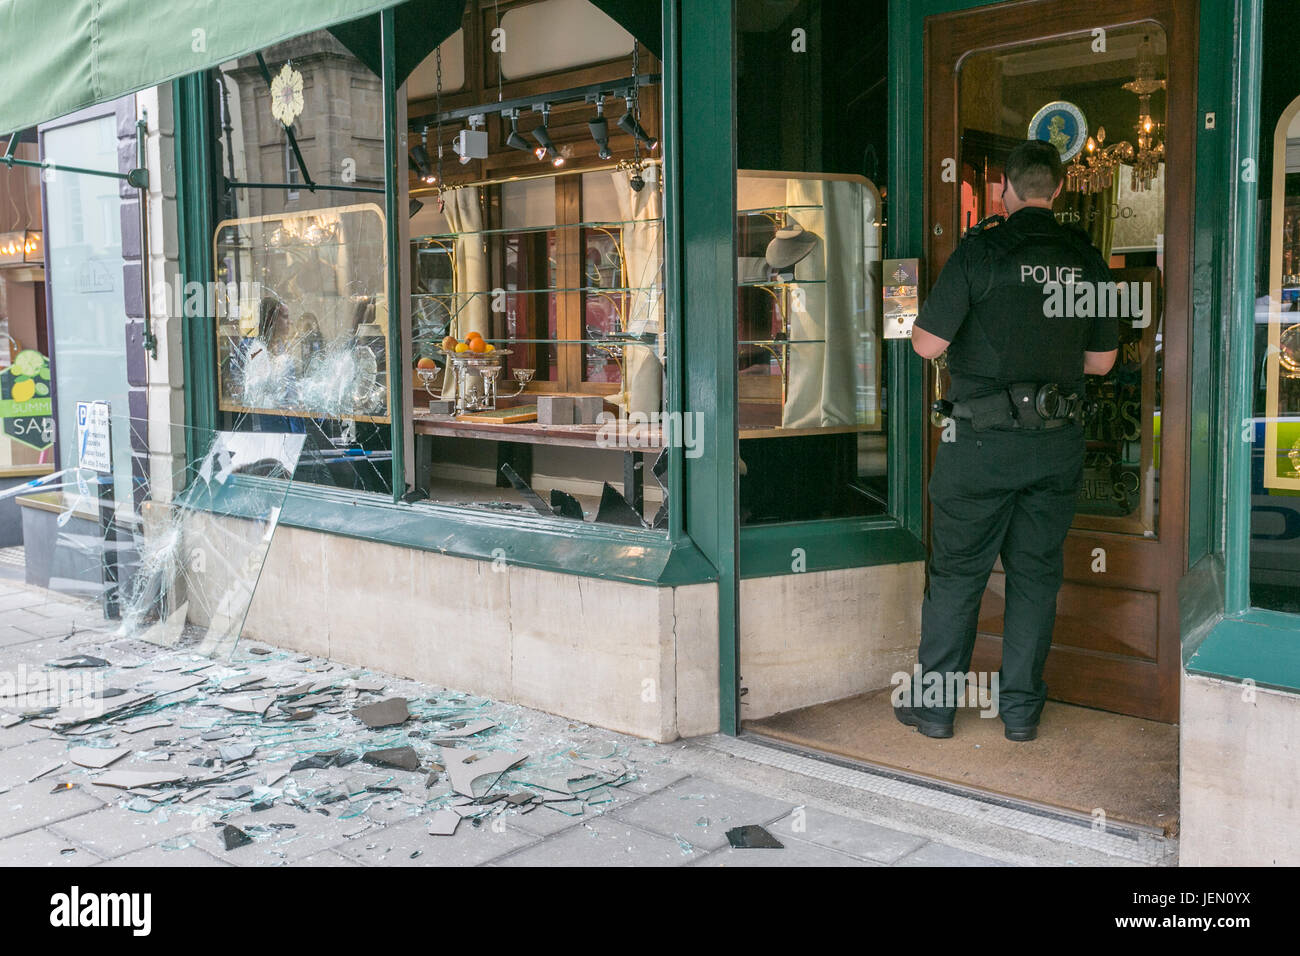 Bristol, UK. 26th June, 2017. A policeman stands next to the smashed jewellery shop windows of Grey-Harris & Co, glass on the pavement. The aftermath of a jewellery 'smash n grab' by 4 armed men who got away on 2 motorbikes in Bristol, UK. Credit: Christian Lathom-Sharp/Alamy Live News. Stock Photo